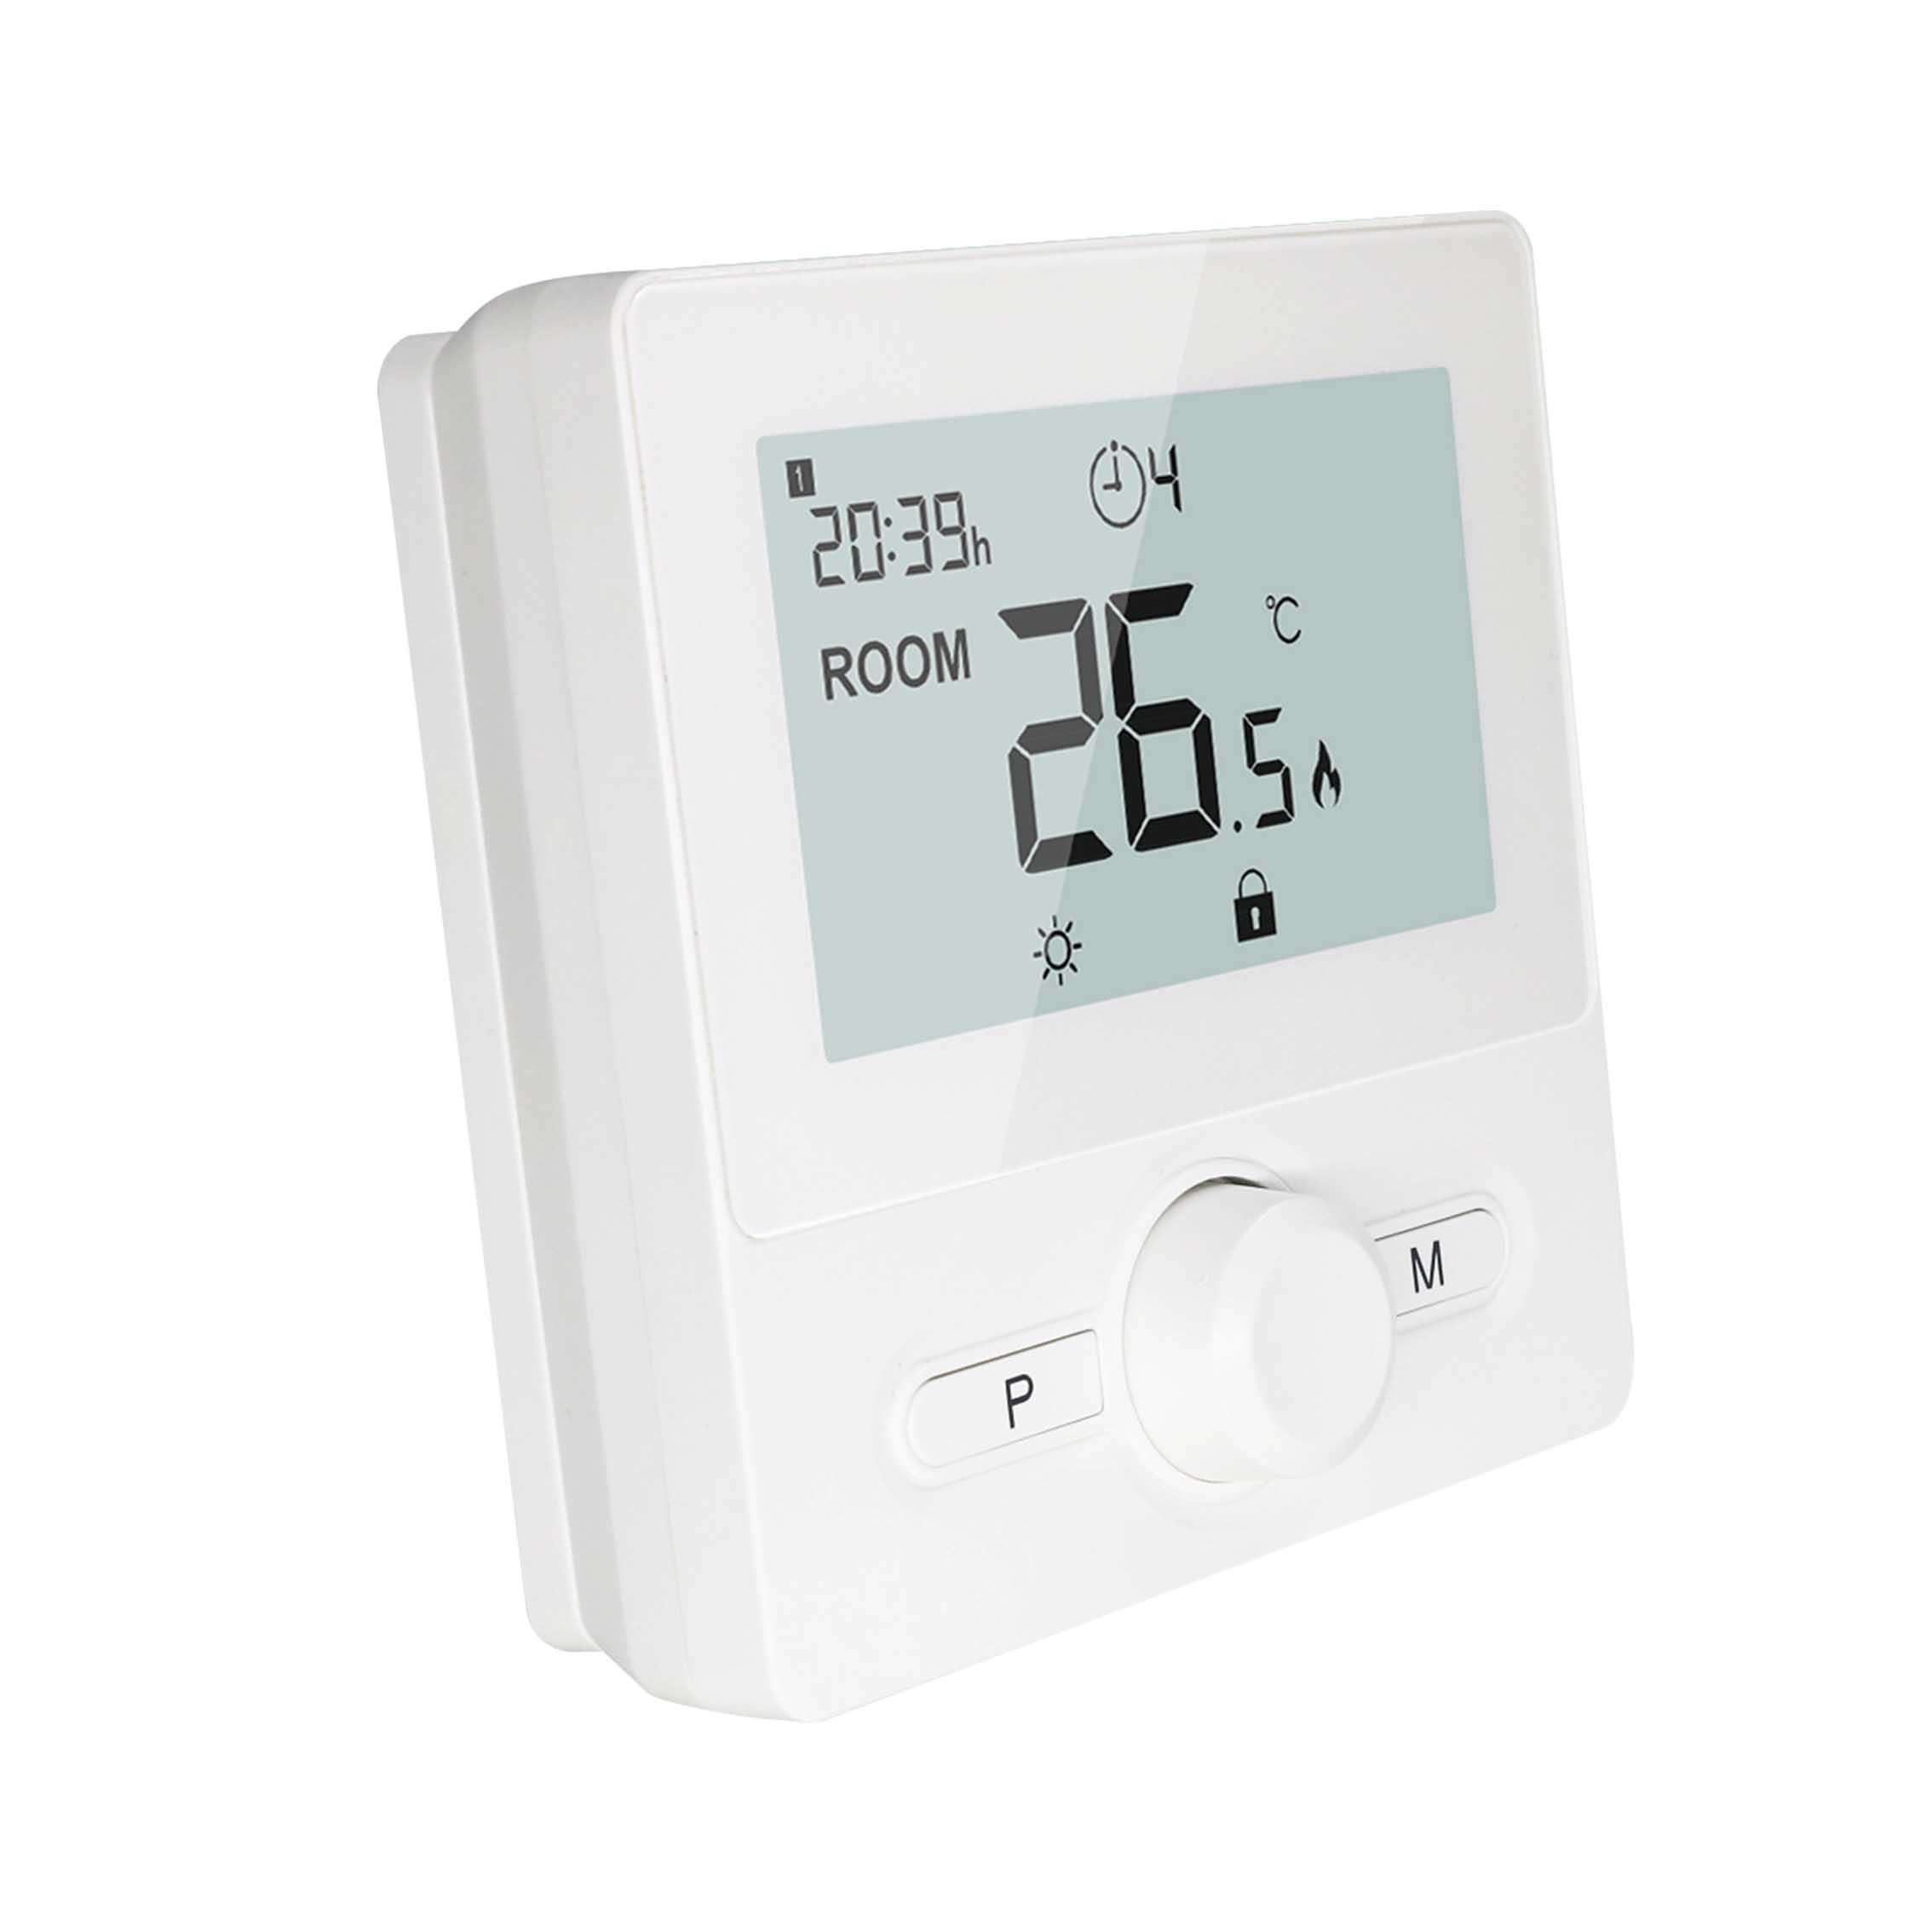 Wireless Heating and Cooling Thermostat Boiler Battery Power